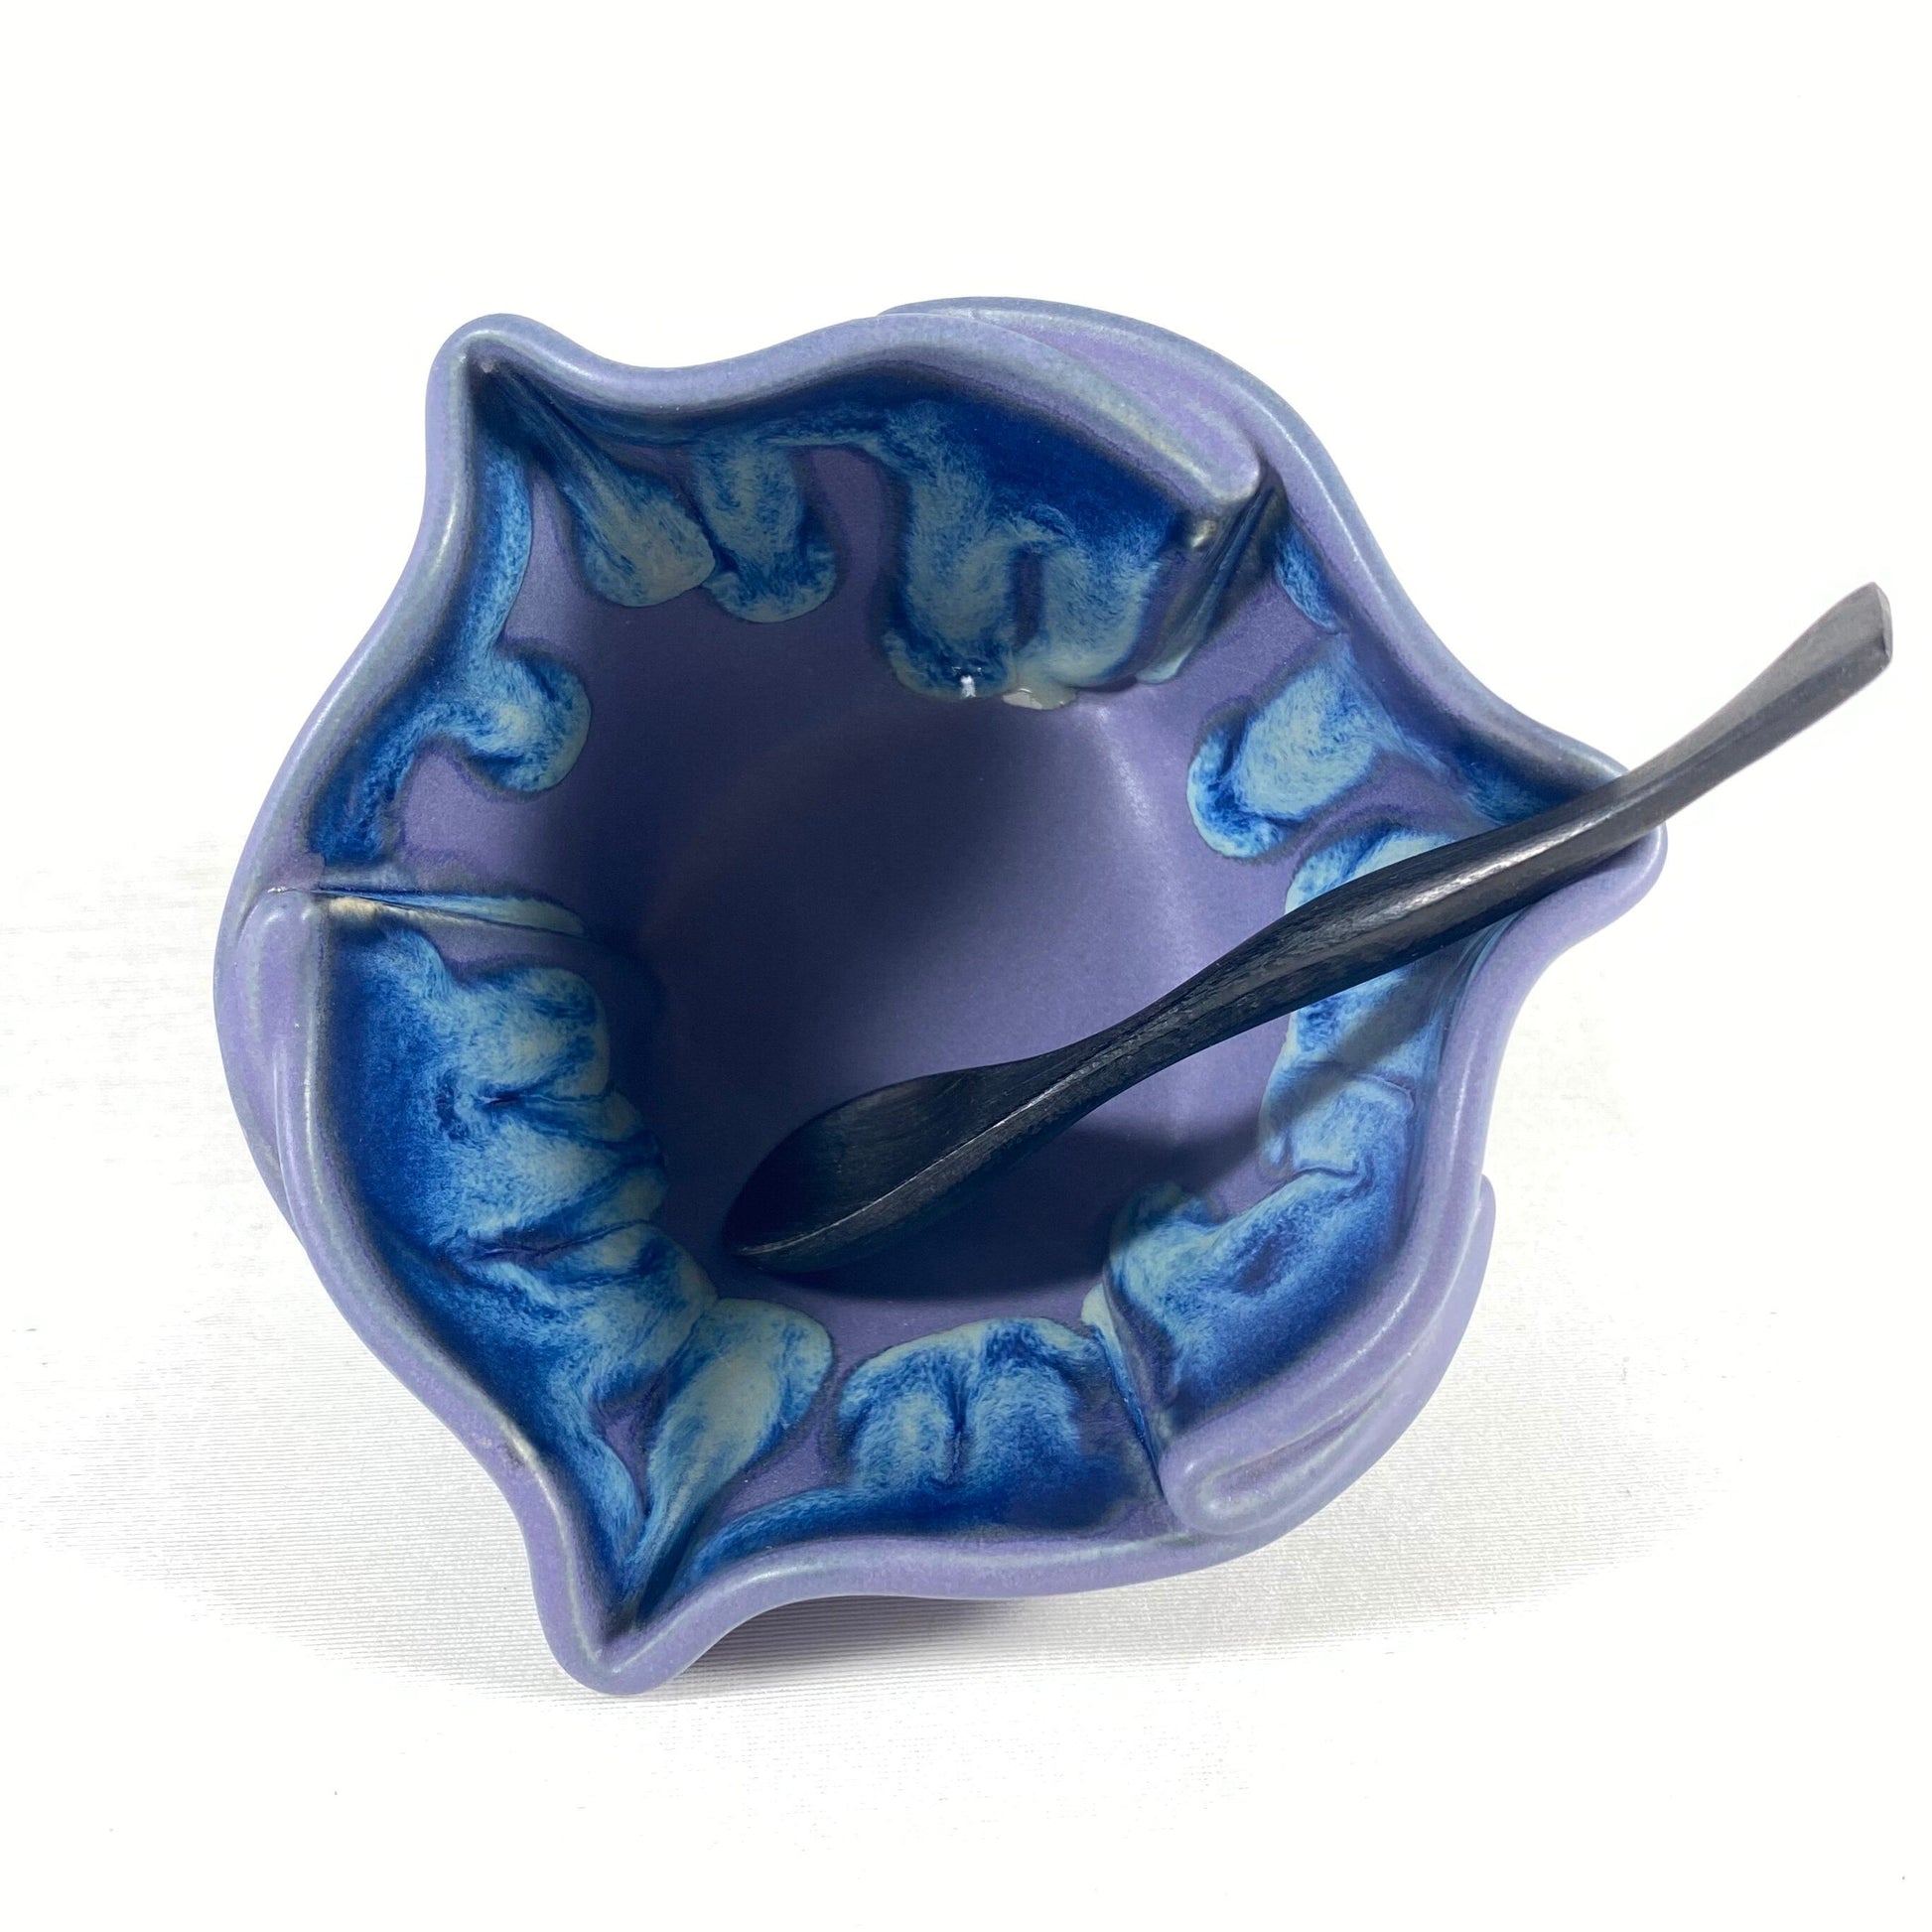 Small Handmade Purple and Blue Multipurpose Dish with Serving Spoon, Functional and Decorative Pottery